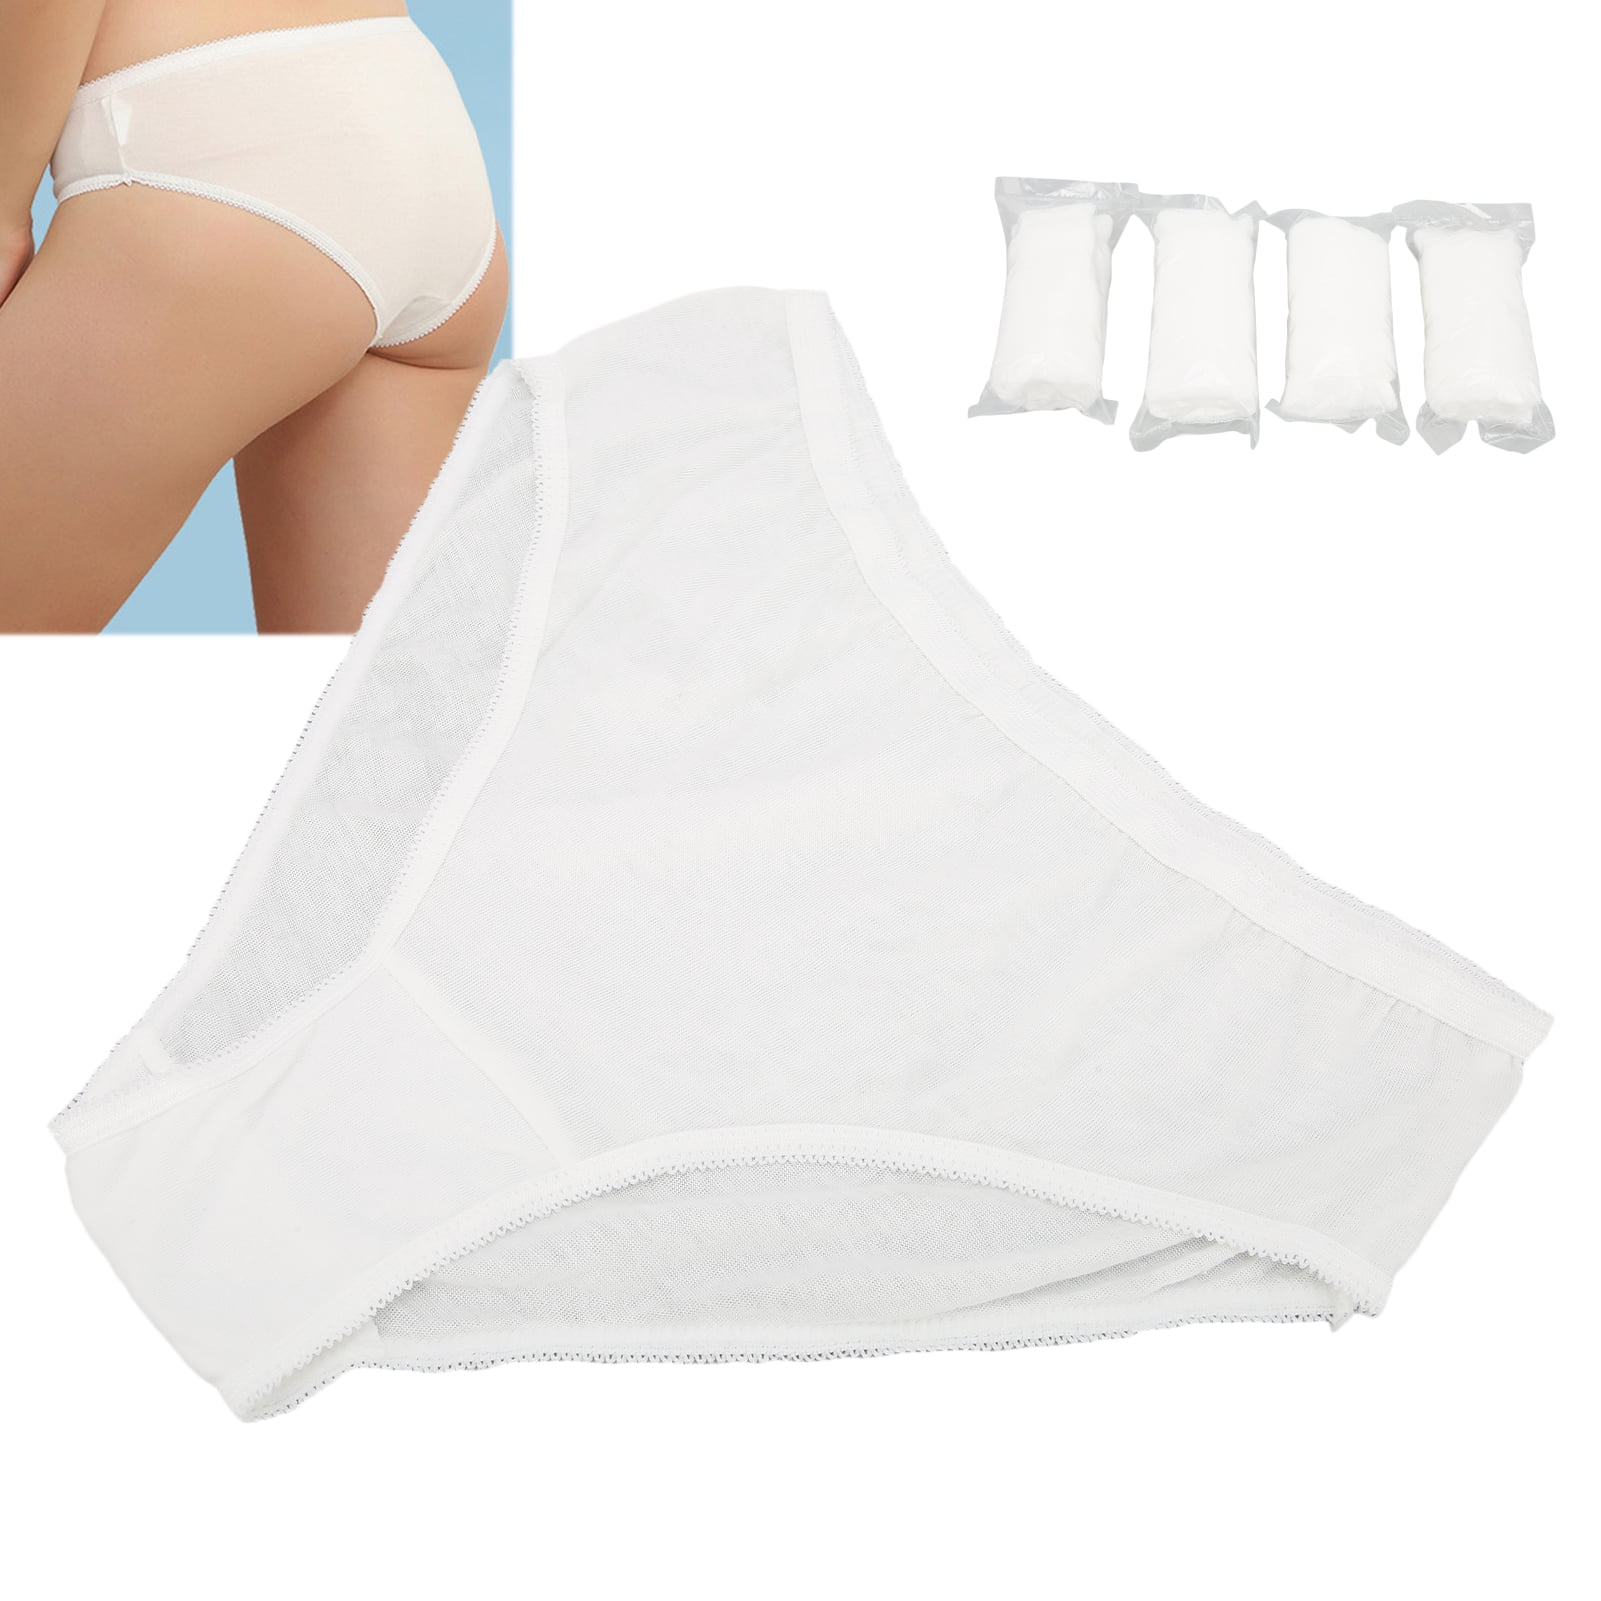 Disposable Cotton Pantie, Double Layer Crotch Protector Disposable  Underwear With High Elastic Waistband For Predelivery For 